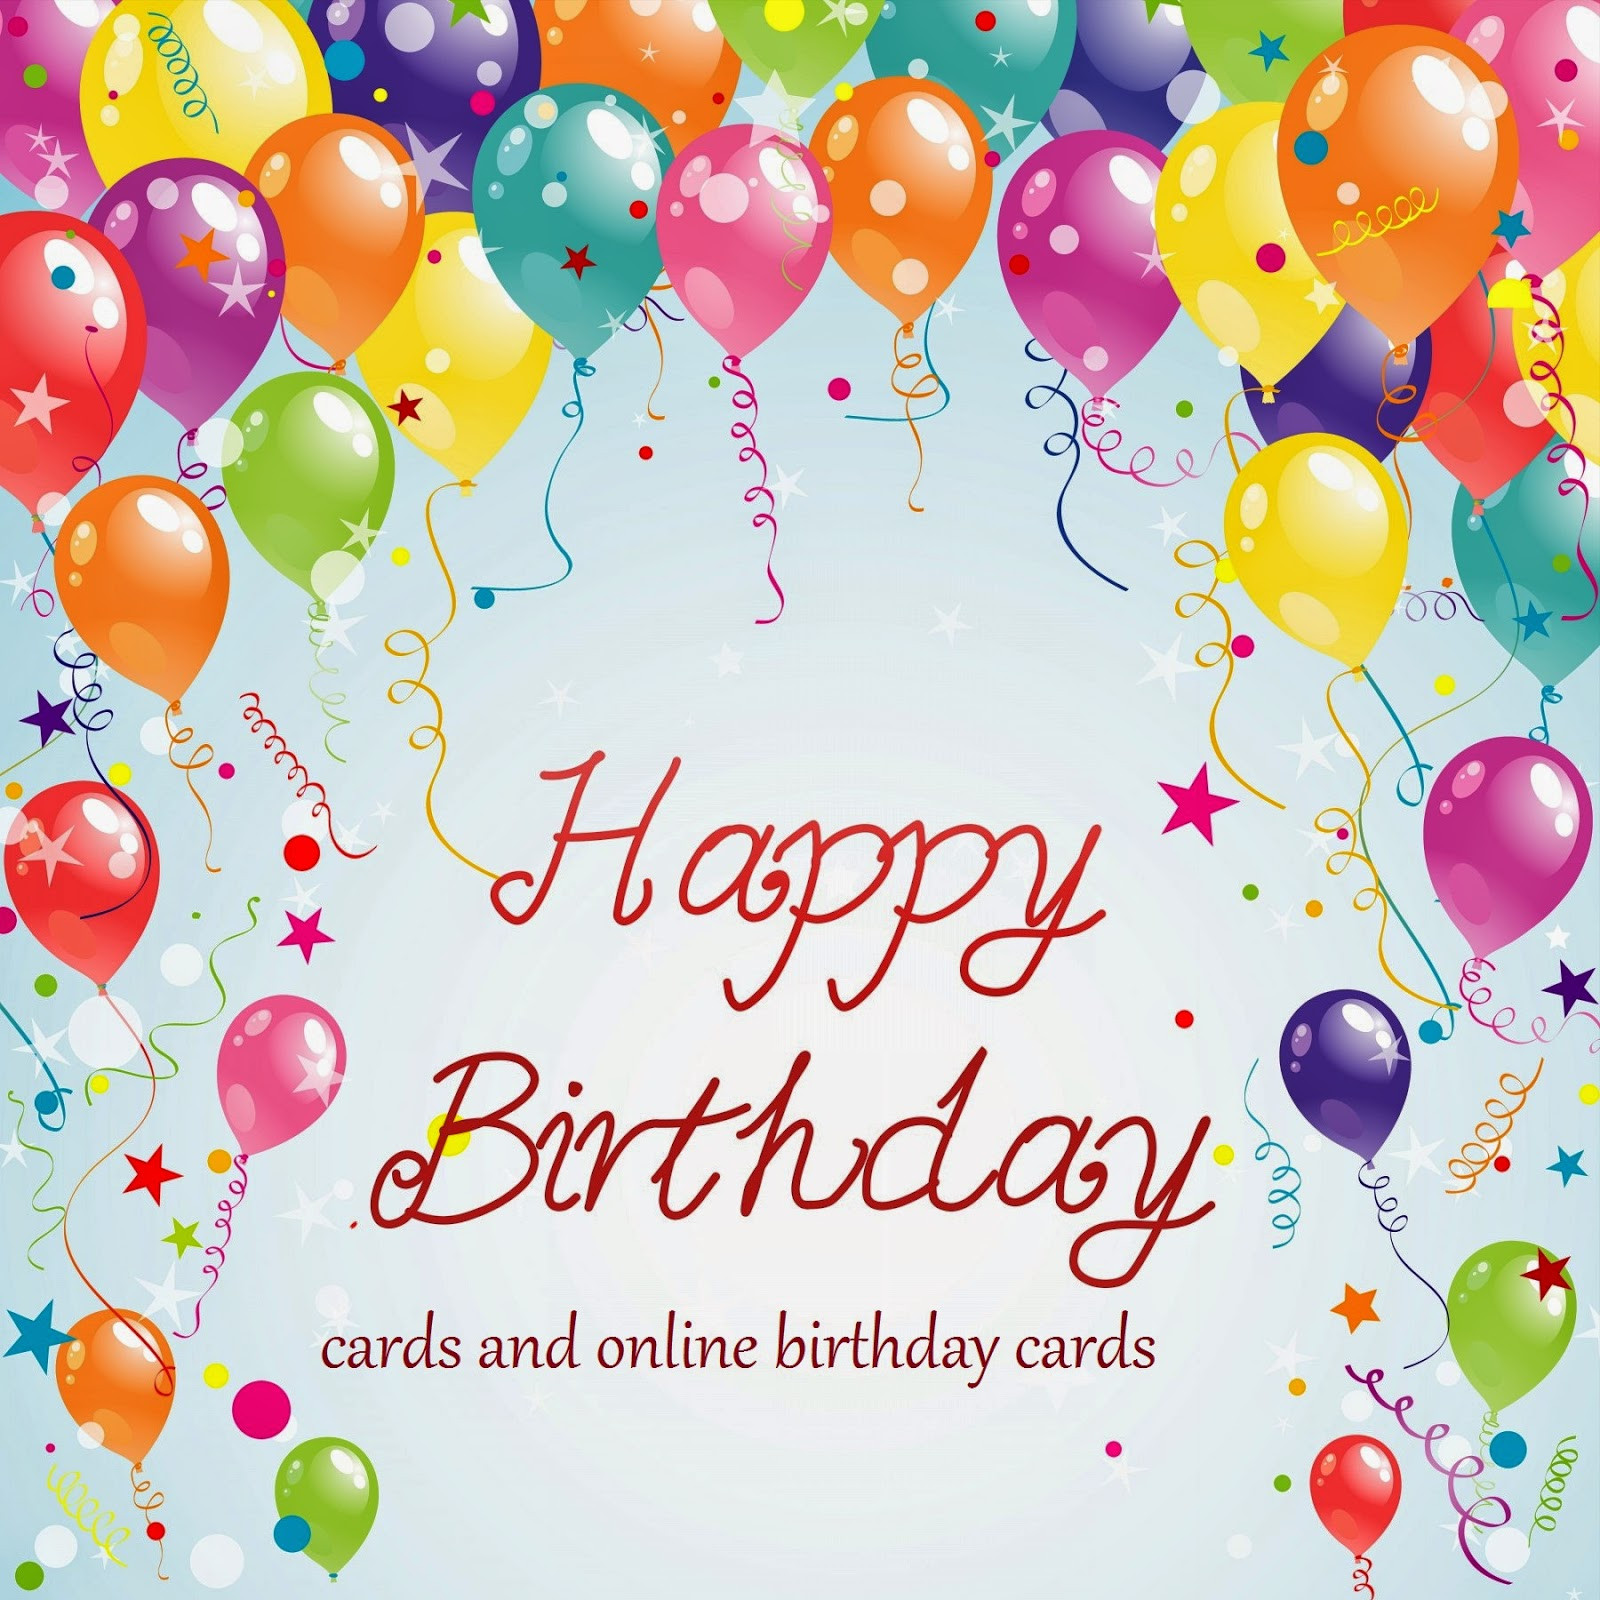 Birthday Card Online Free
 Happy birthday cards free [birthday cards] and e